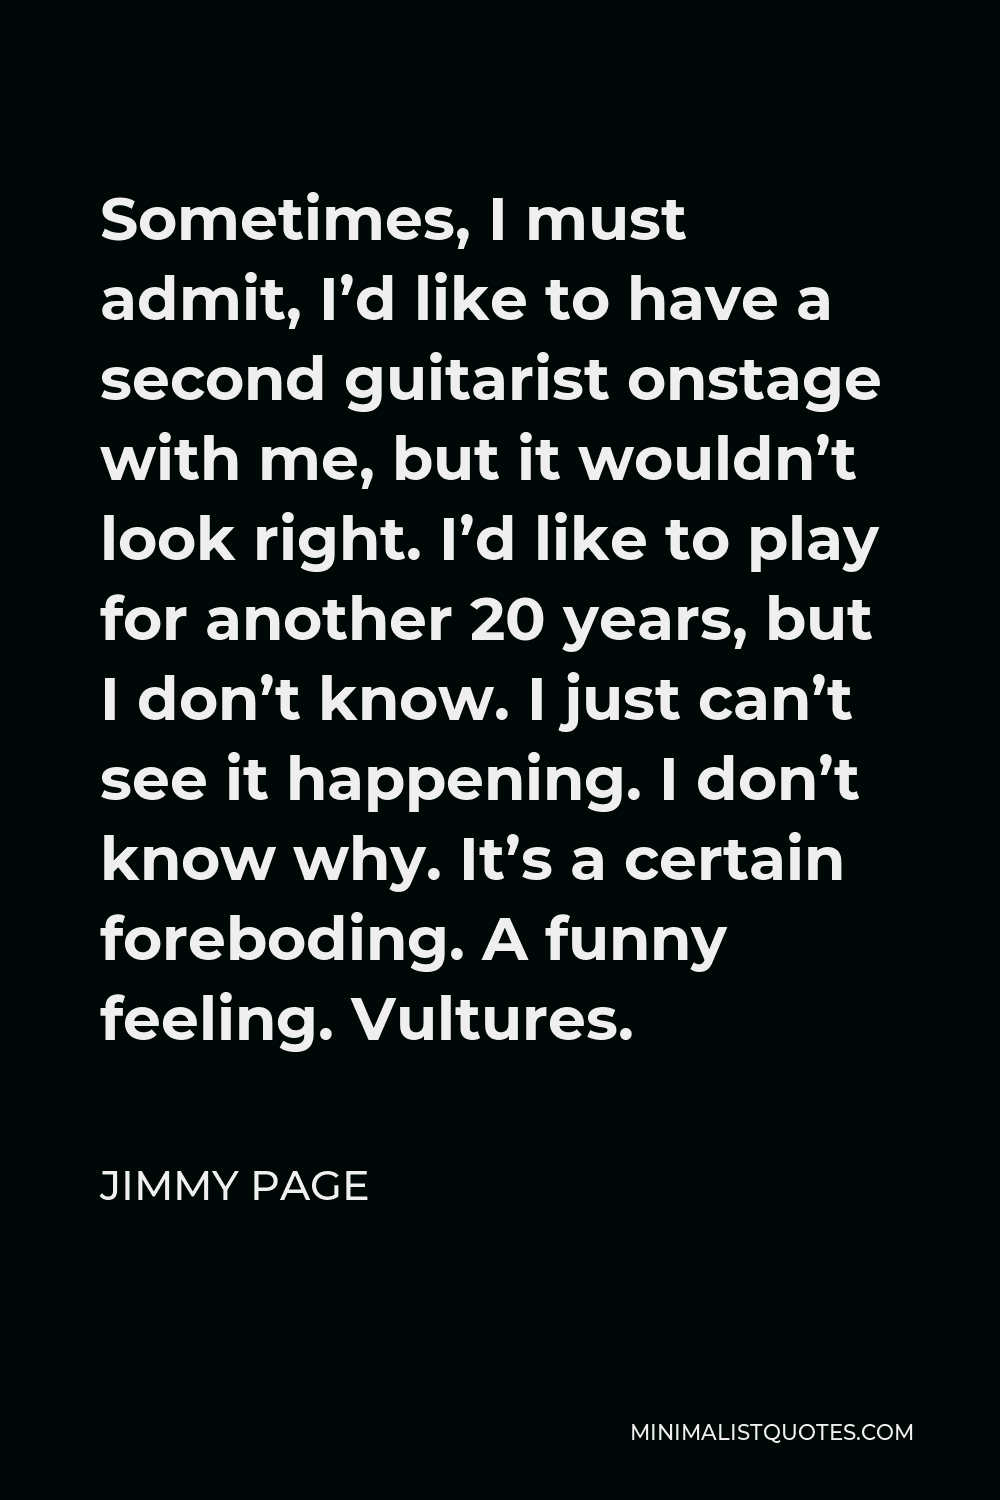 Jimmy Page Quote: Sometimes, I must admit, I'd like to have a second  guitarist onstage with me, but it wouldn't look right. I'd like to play for  another 20 years, but I